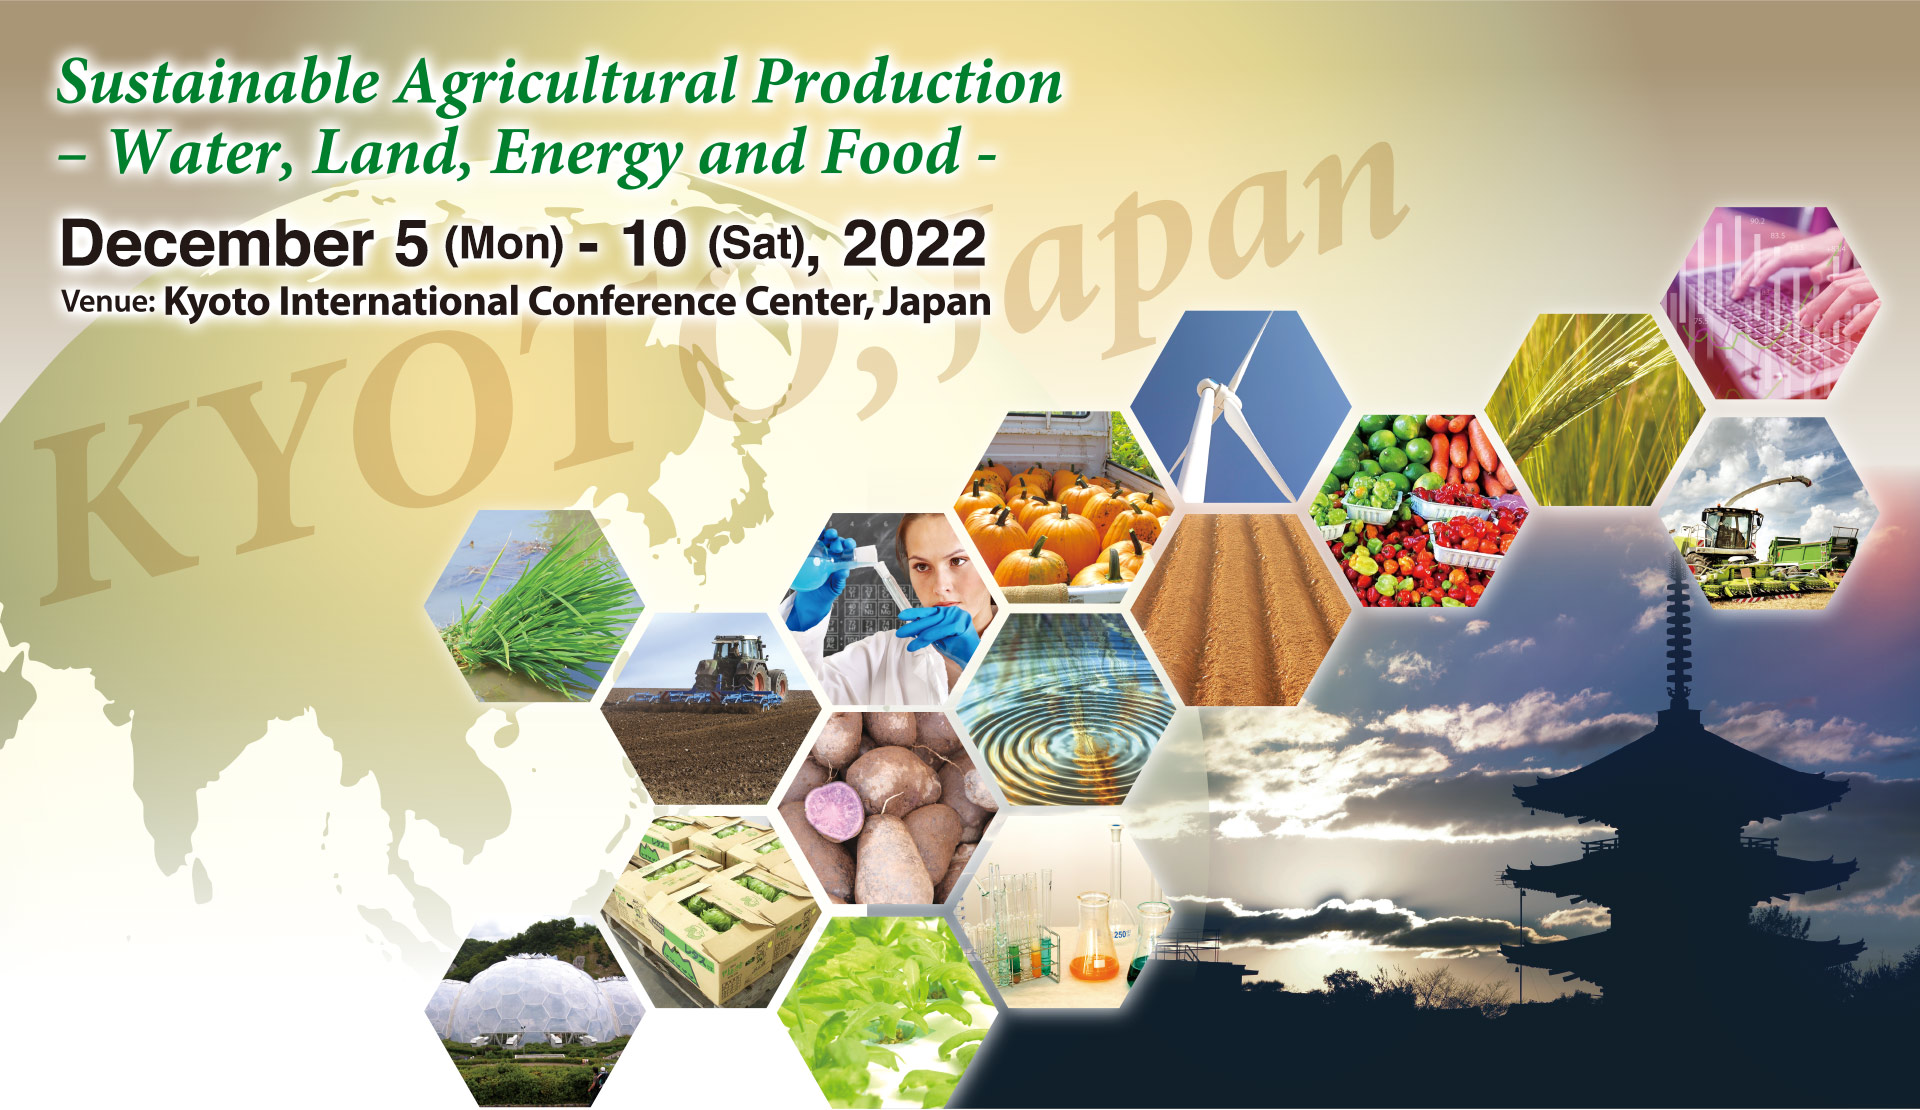 Sustainable Agricultural Production - Water, Land, Energy and Food